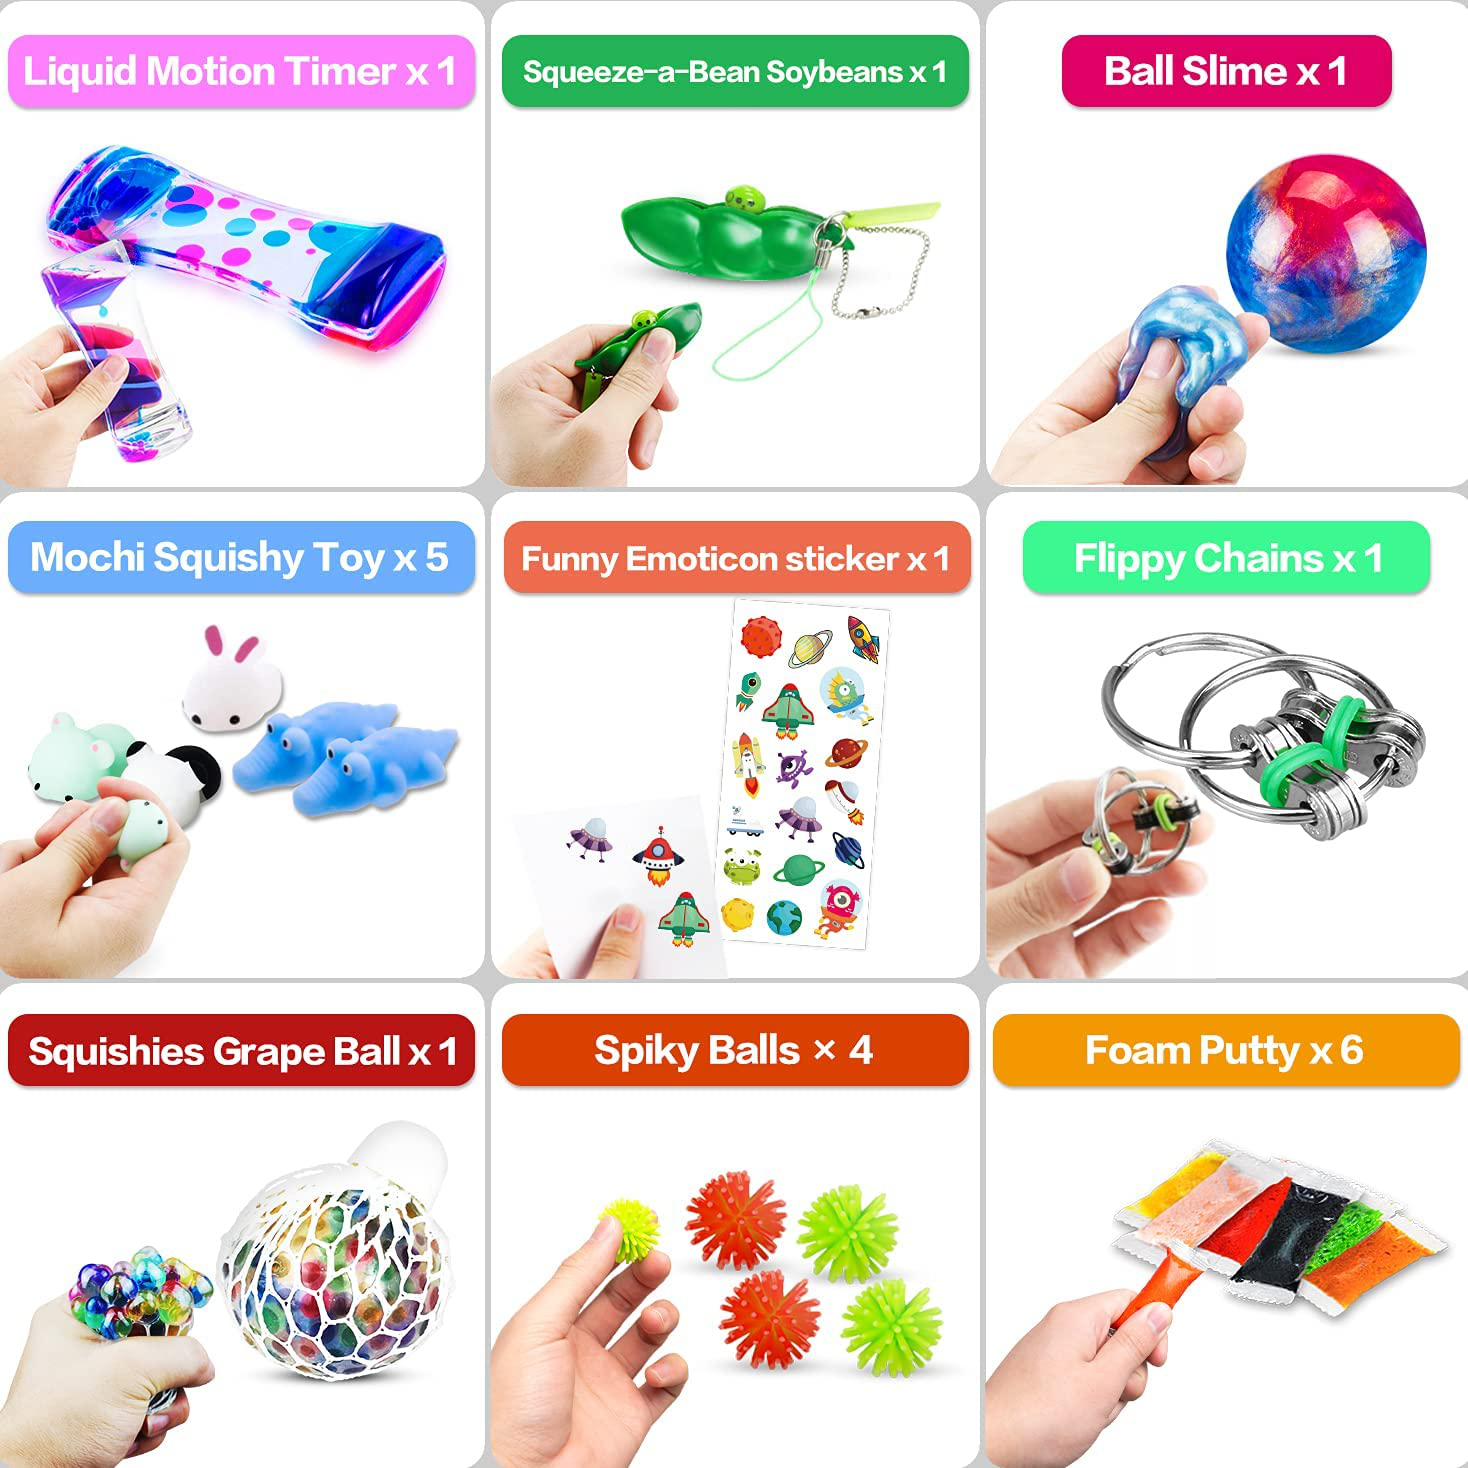 Hhobby Stars 42 Pcs Sensory Fidget Toys Pack, Stress Relief & Anxiety Relief Tools Bundle Figetget Toys Set for Kids Adults, Autistic ADHD Toys, Stress Balls Infinity Cube Marble Mesh Fidgets Box